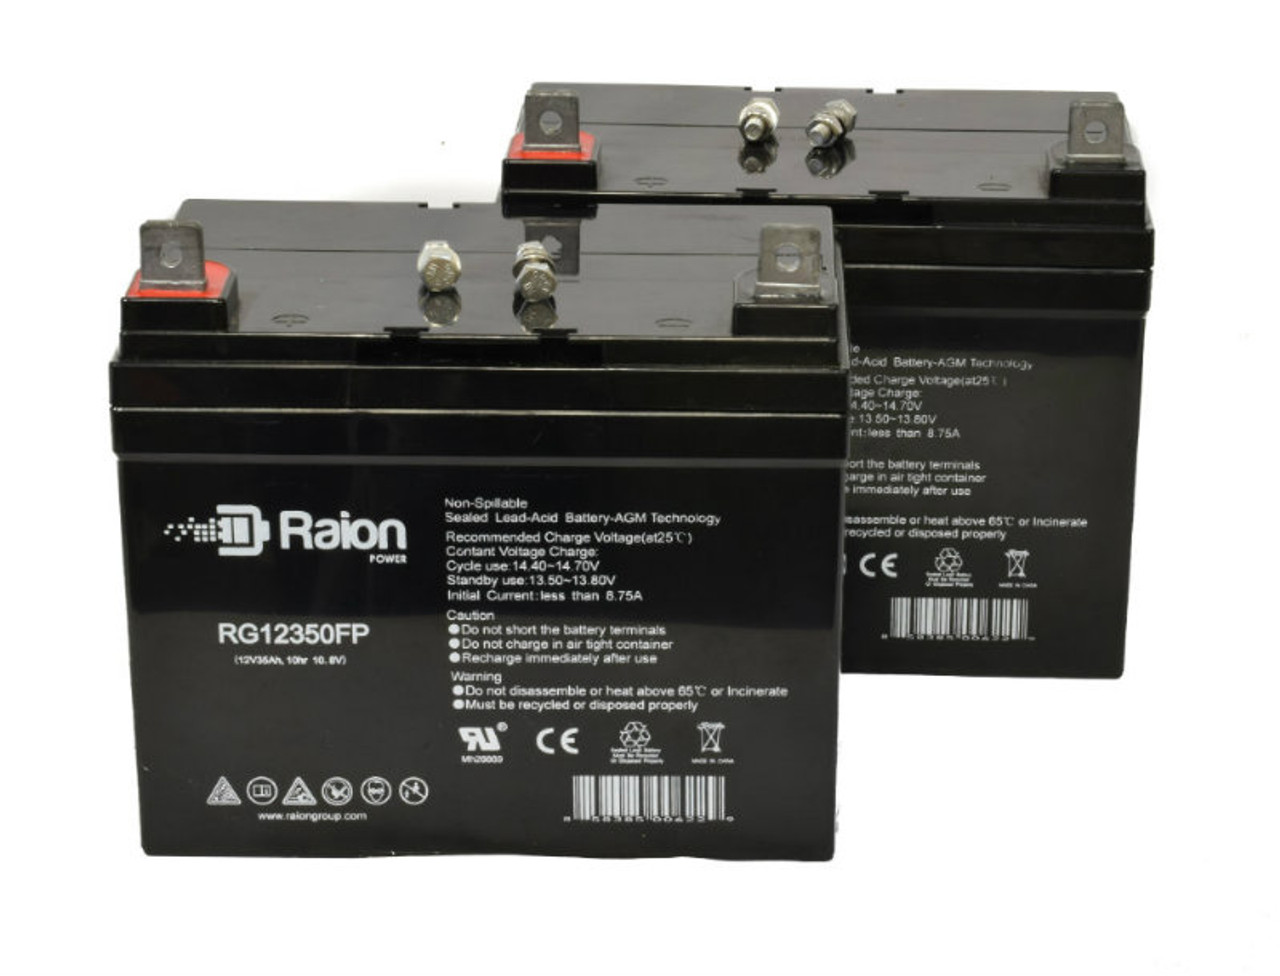 Raion Power Replacement 12V 35Ah Lawn Mower Battery for J.I. Case & Case Ih Lawn 80 - 2 Pack